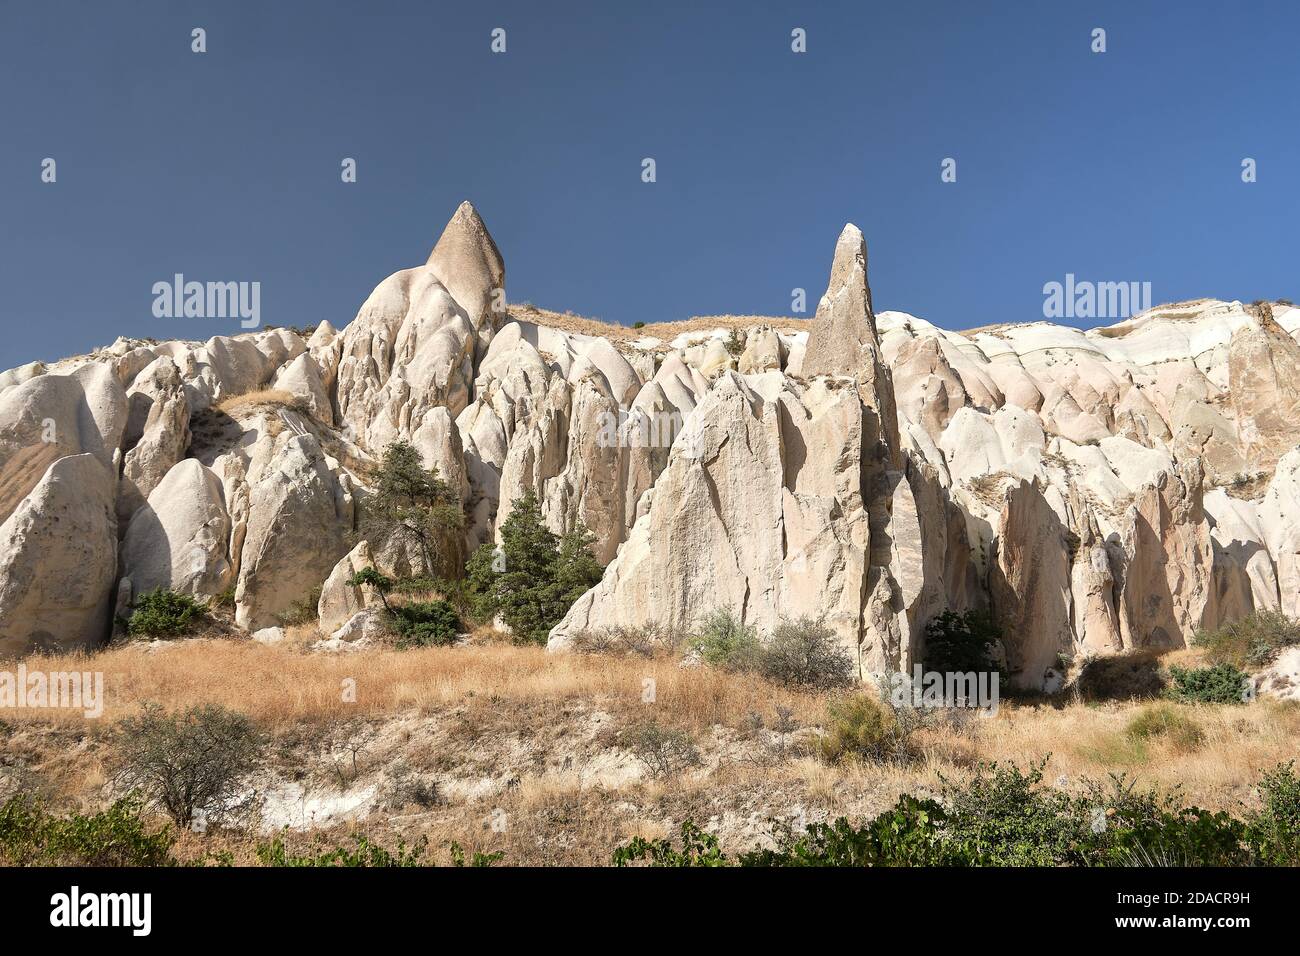 Cappadocia walking trail view of the ruins of fairy chimney shelters built in the rock, Cappadocia, Turkey Stock Photo